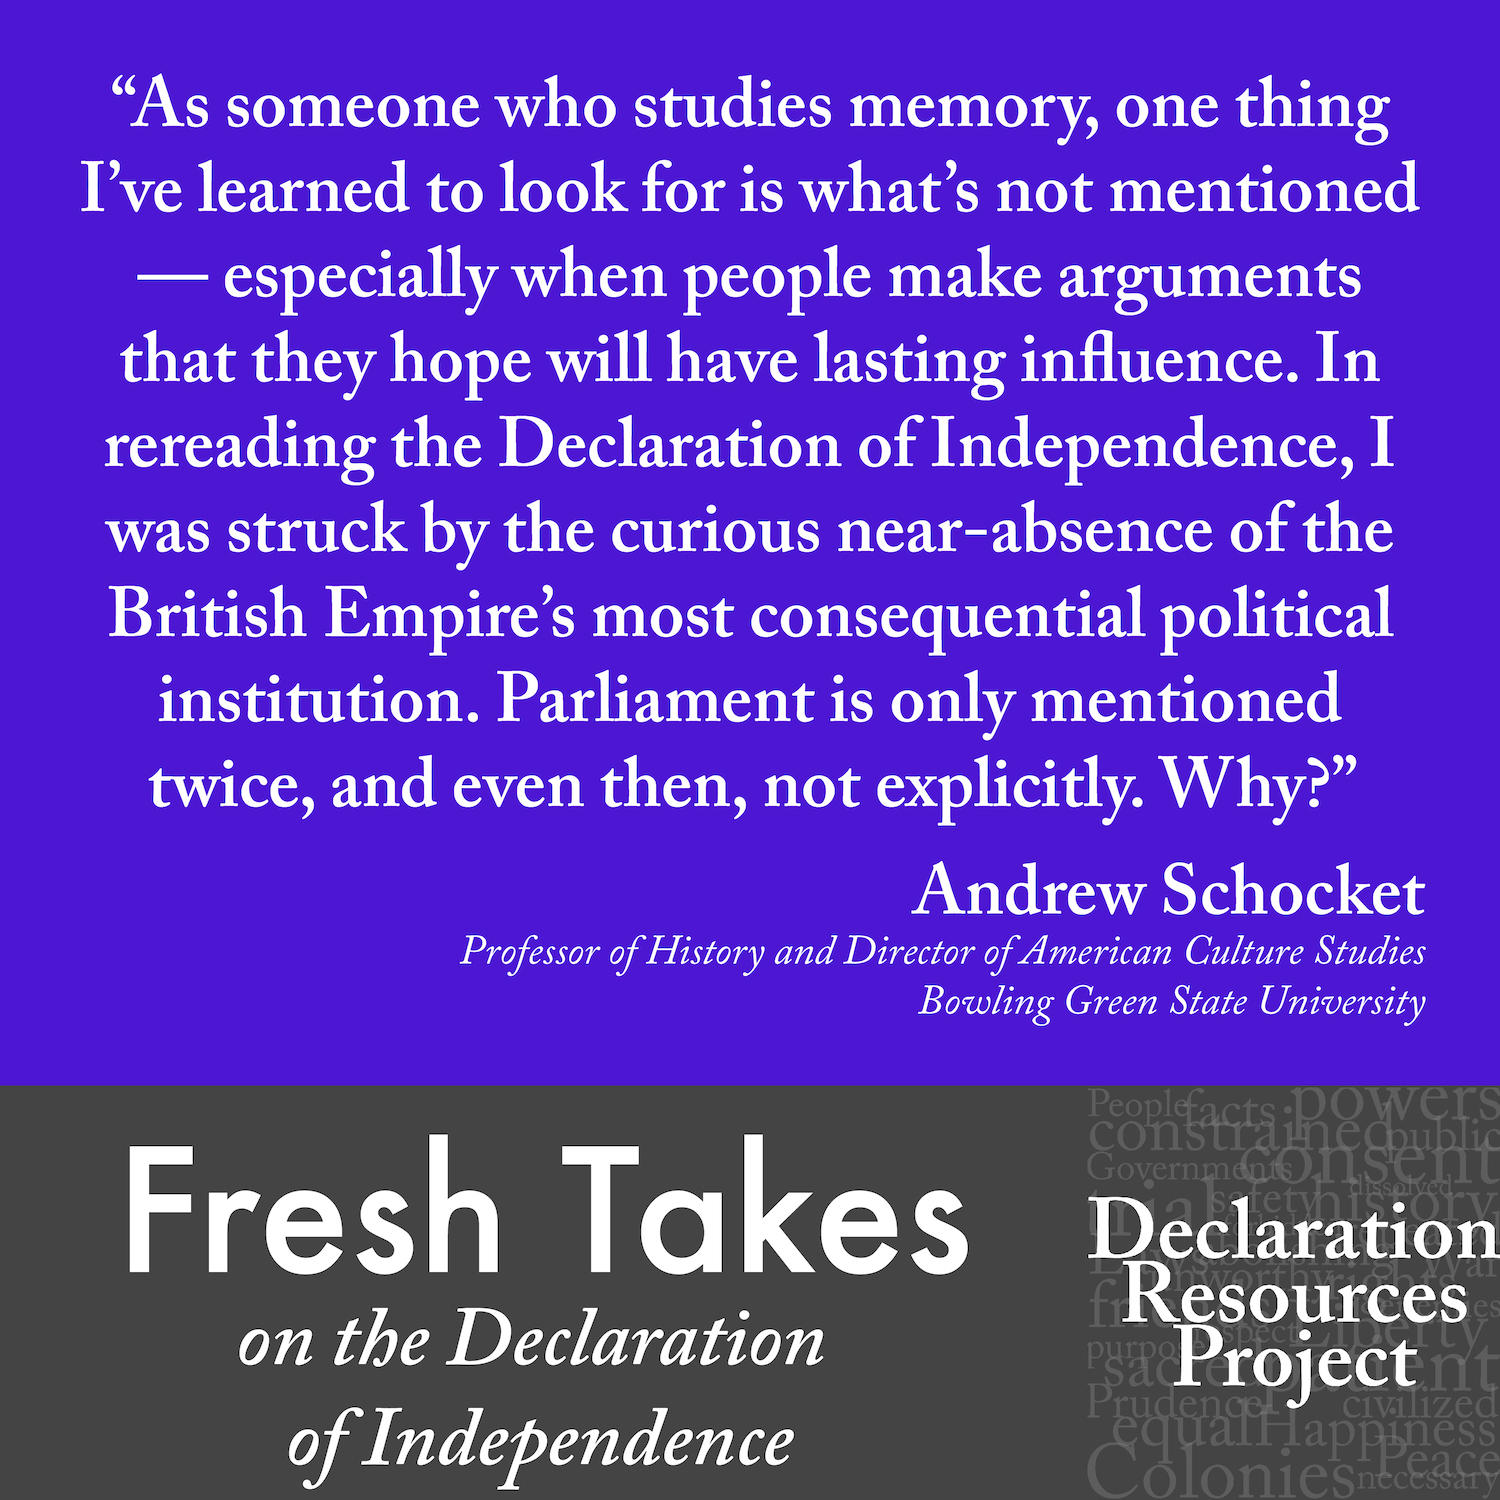 Andrew Schocket's Fresh Take on the Declaration of Independence